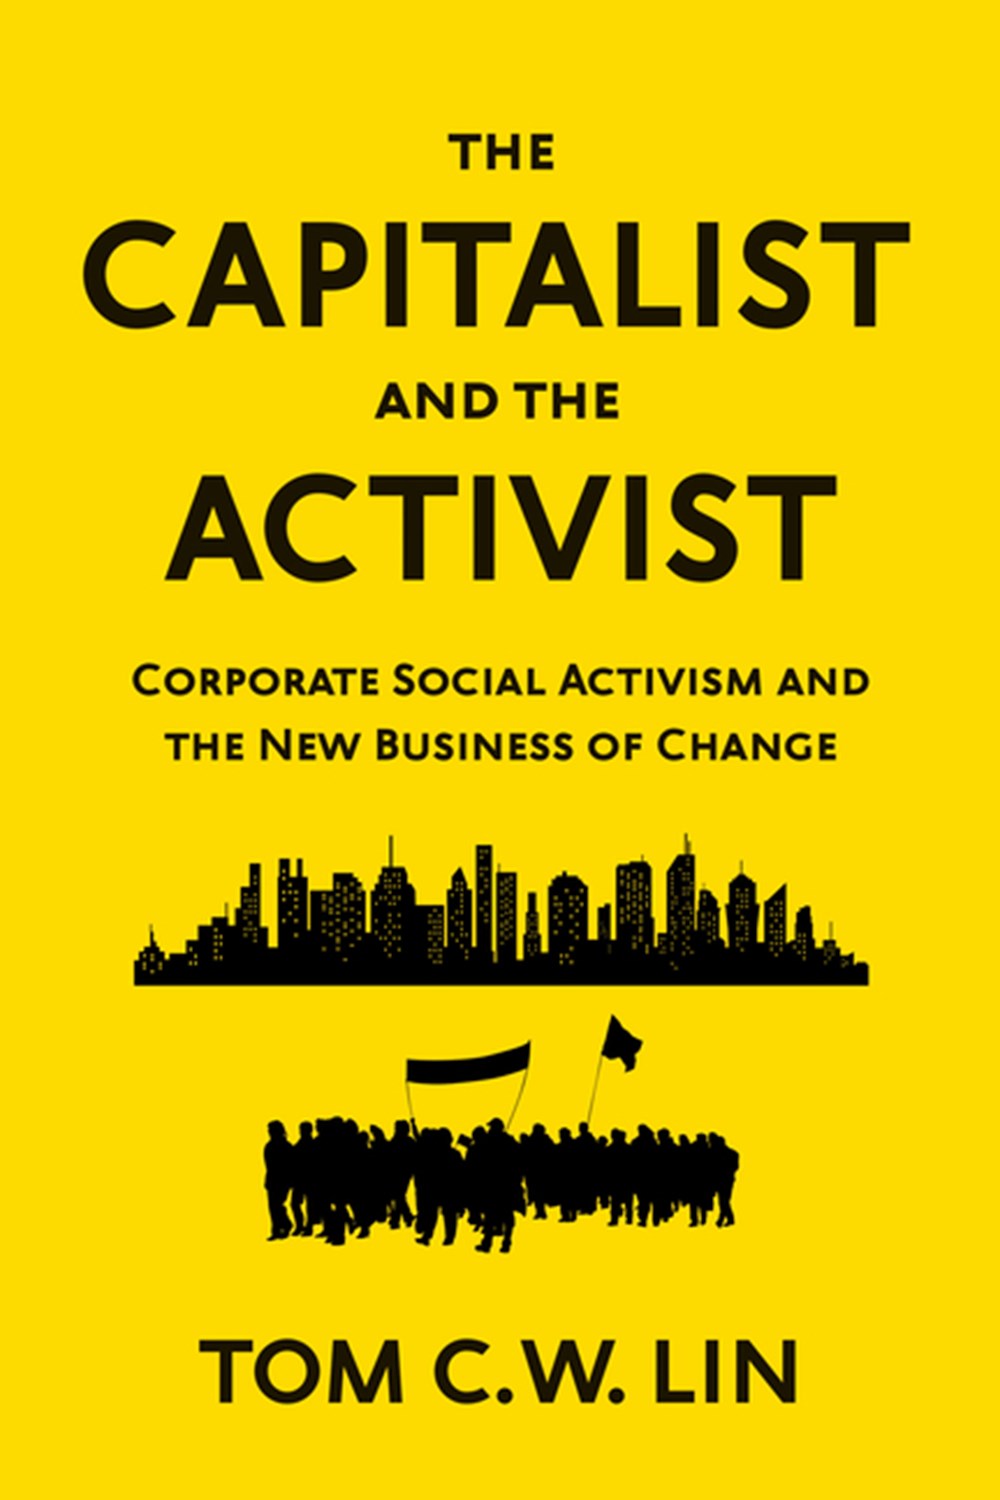 Capitalist and the Activist: Corporate Social Activism and the New Business of Change